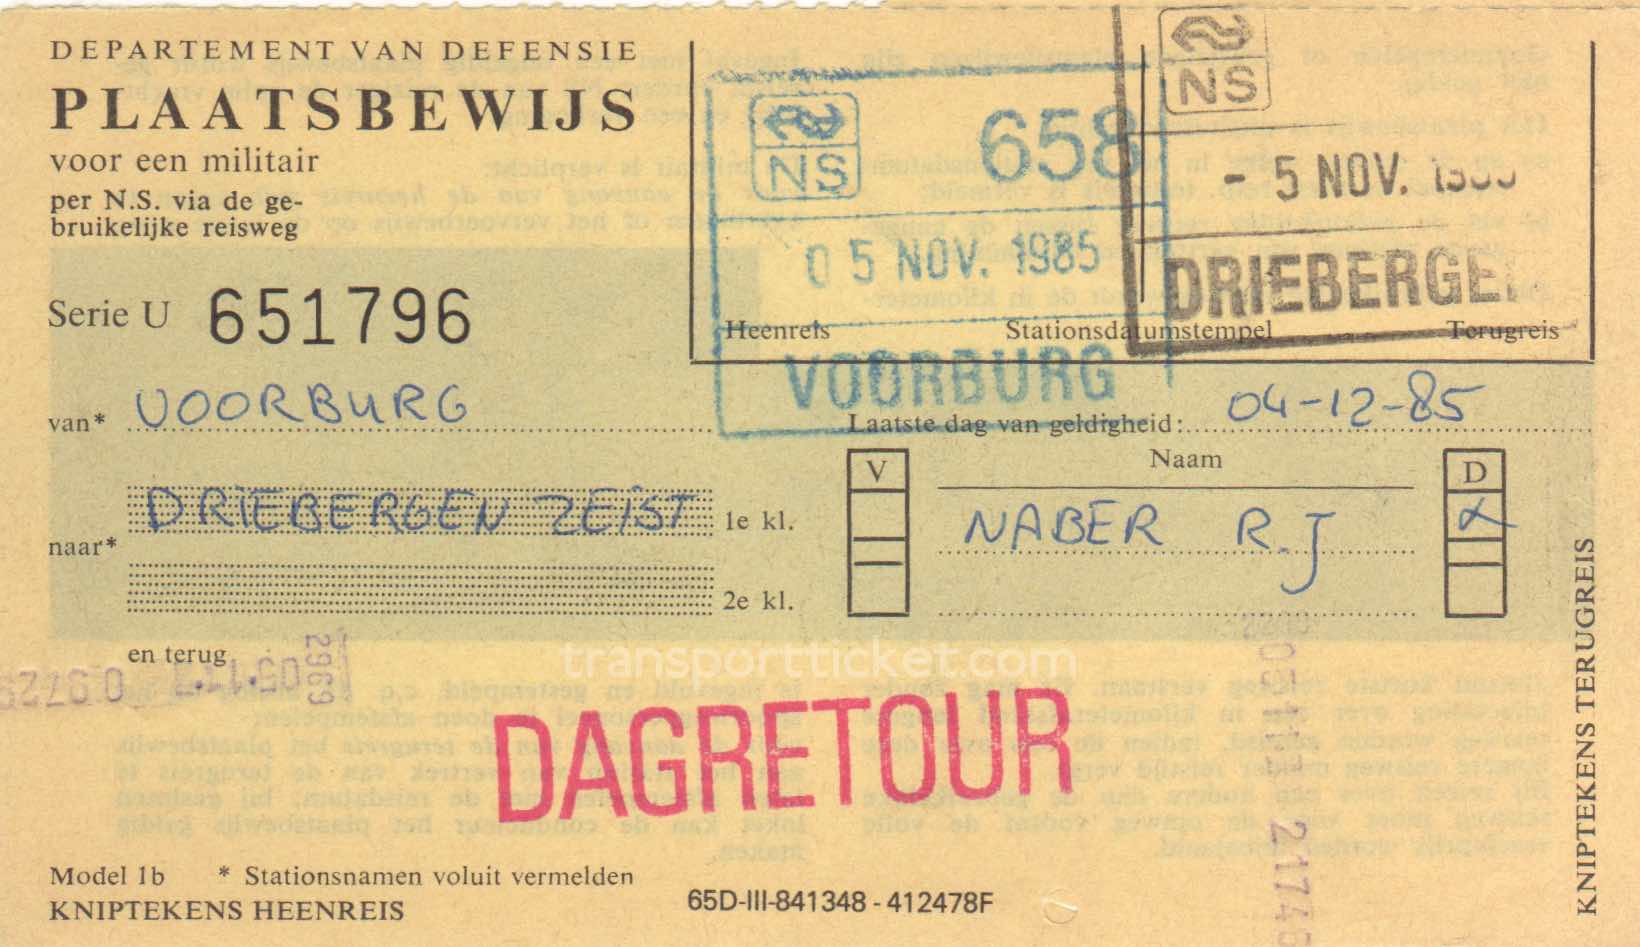 transport ticket issued by Dutch Department of Defense (1985)